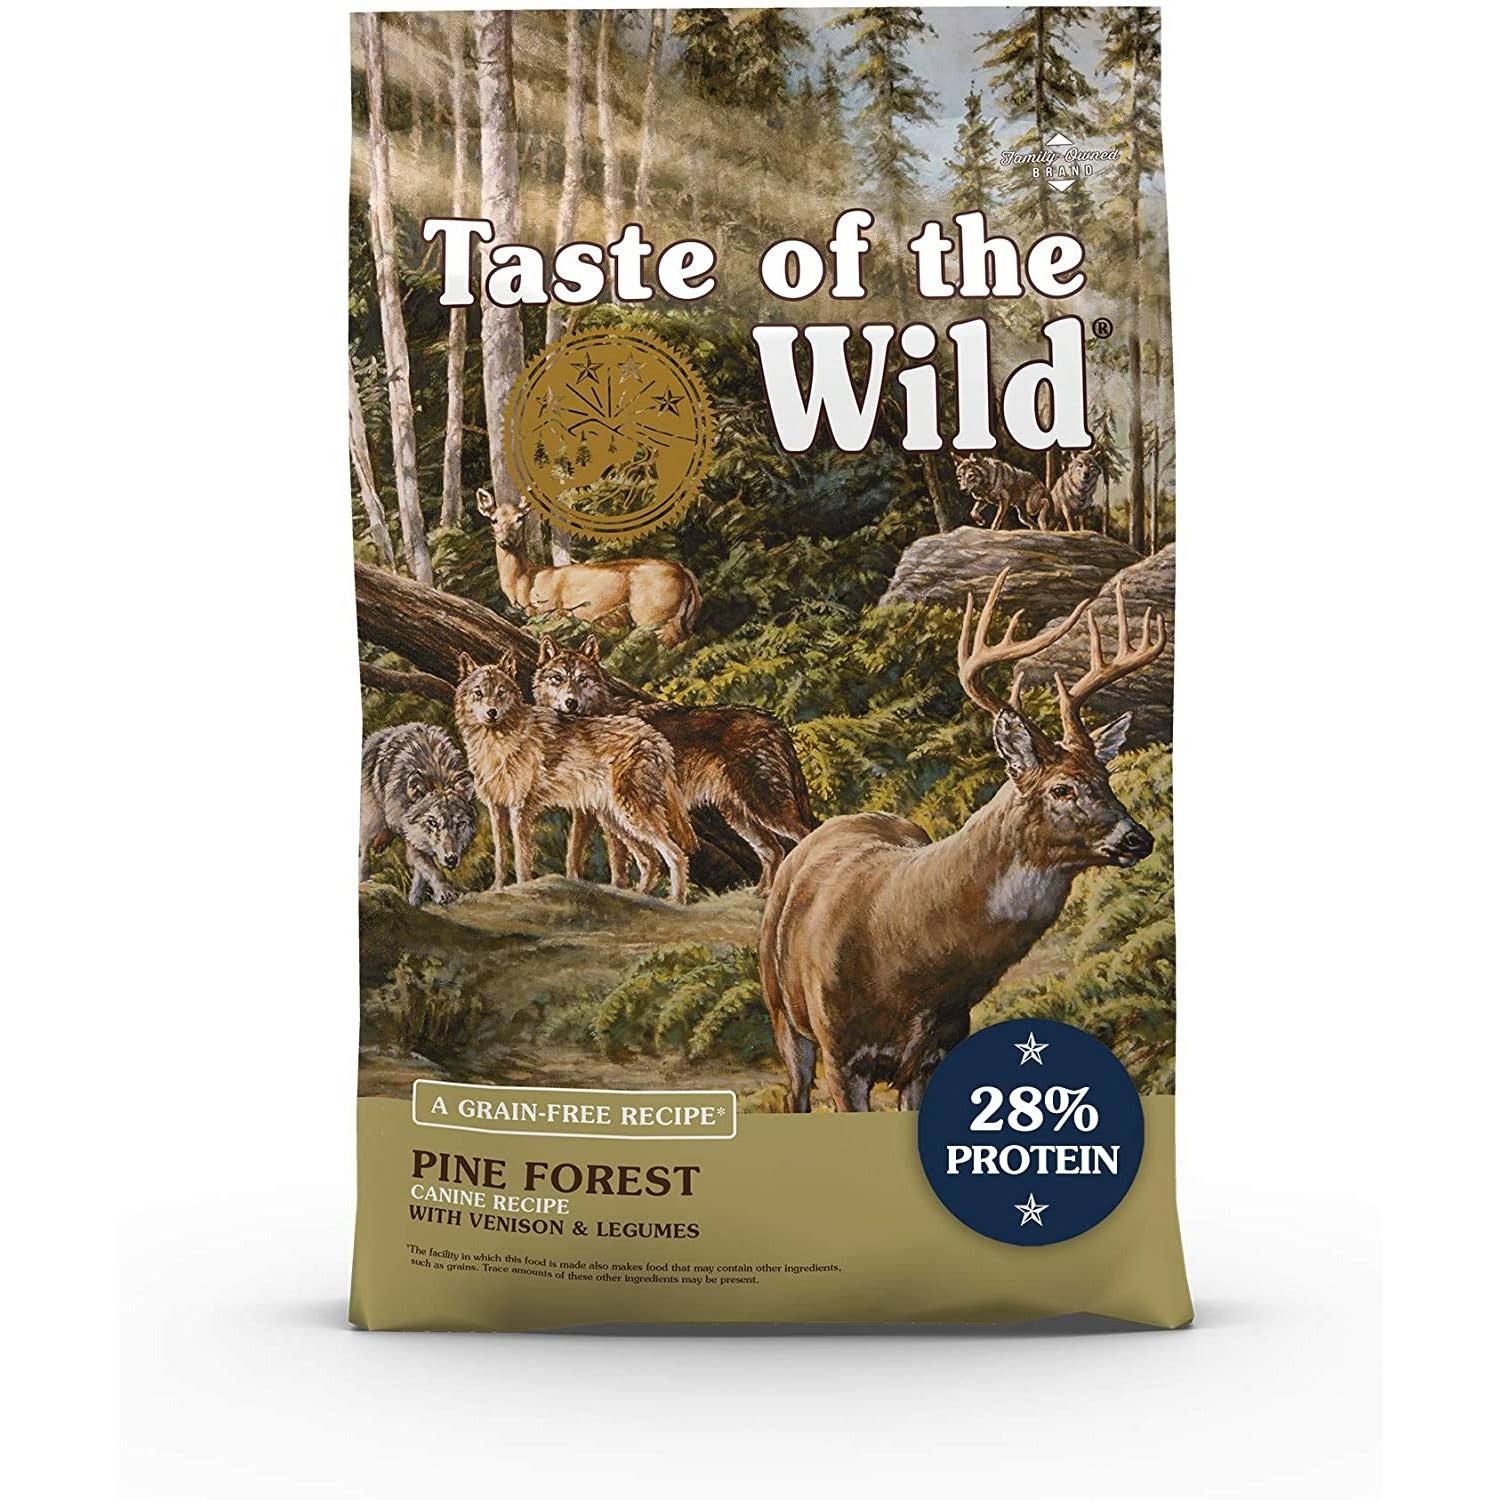 Taste of the Wild Dog Food - Pine Forest Canine Formula with Venison and Legunies